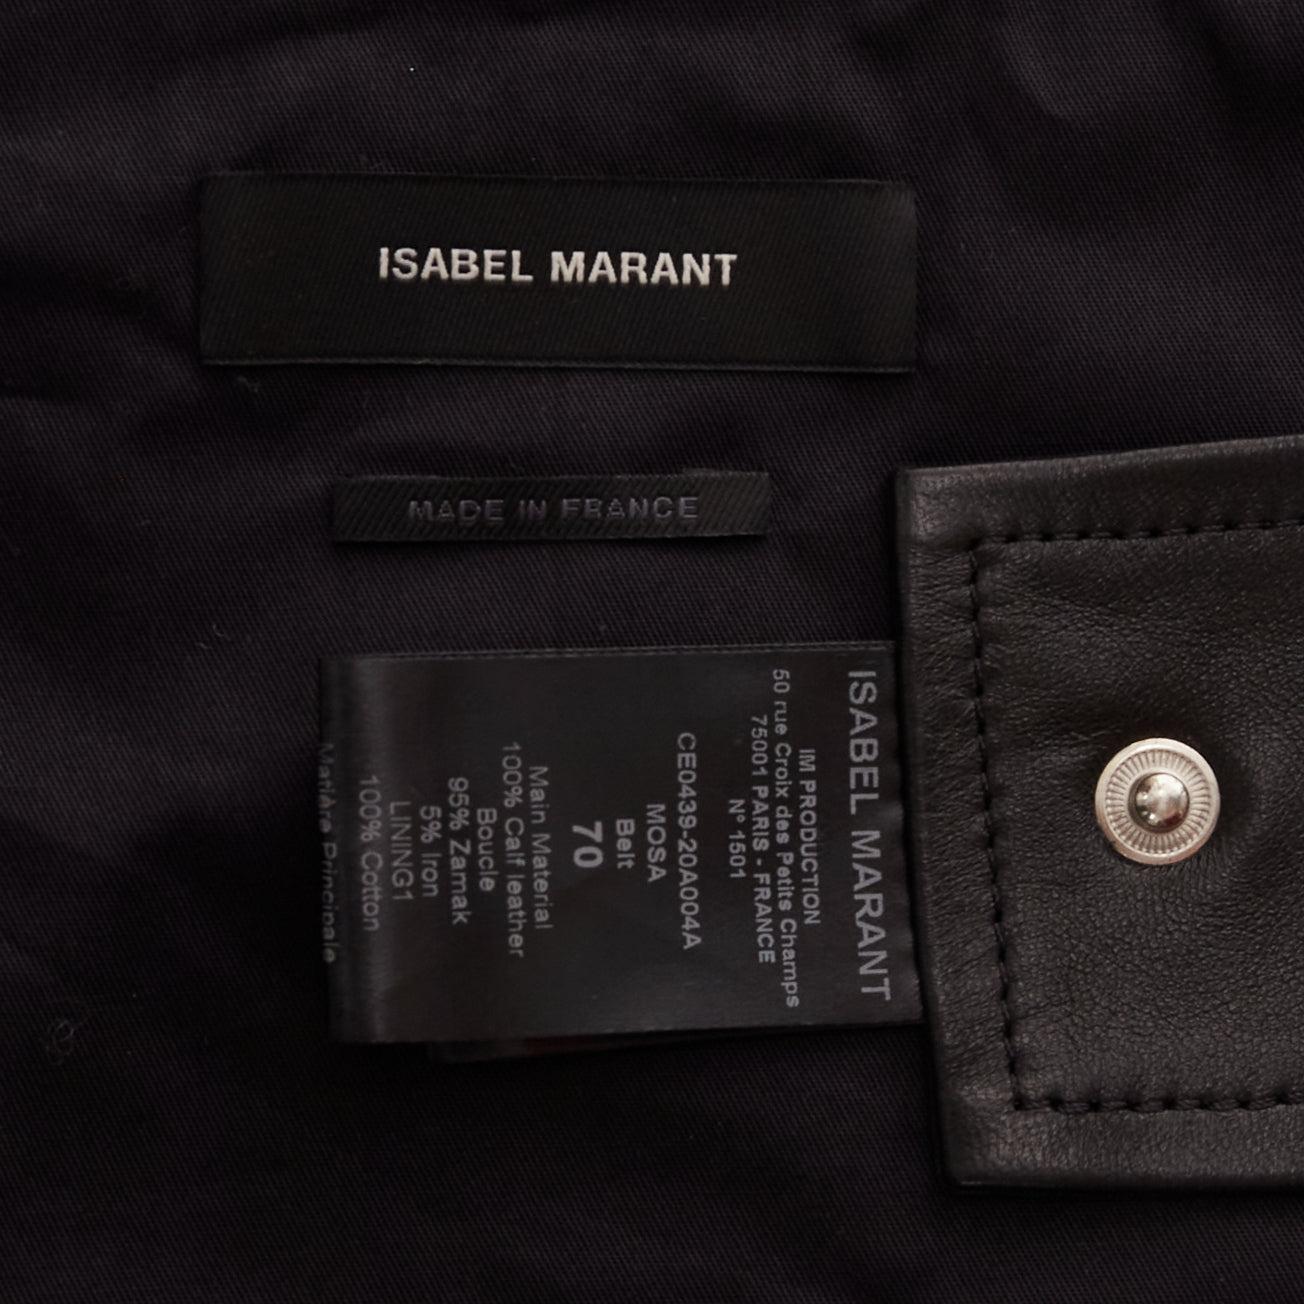 ISABEL MARANT Mosa black calf leather silver metal ring cotton lined belt 70cm For Sale 5